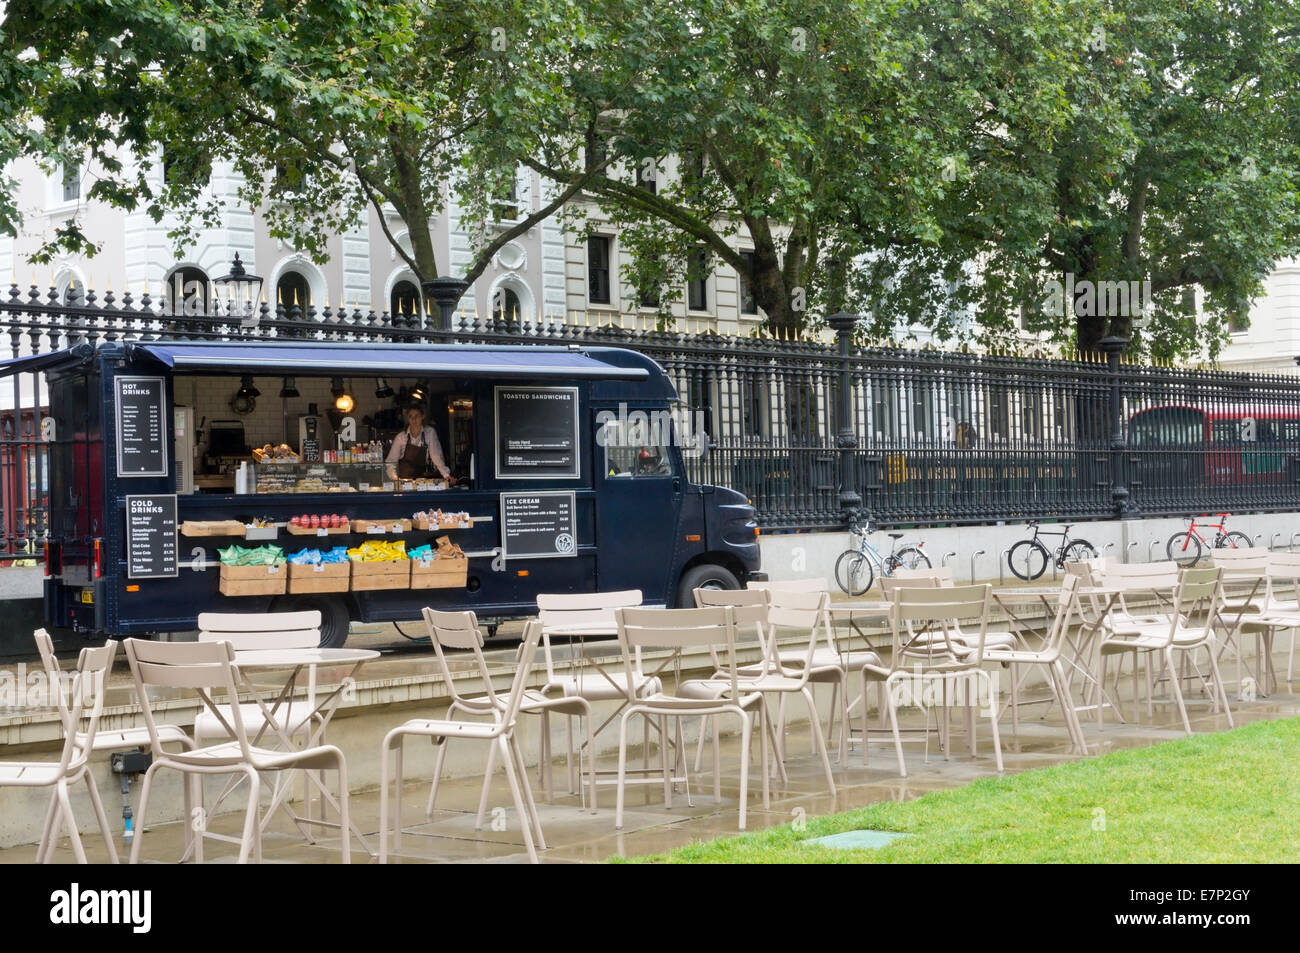 A mobile snack bar with no customers in the rain. Stock Photo